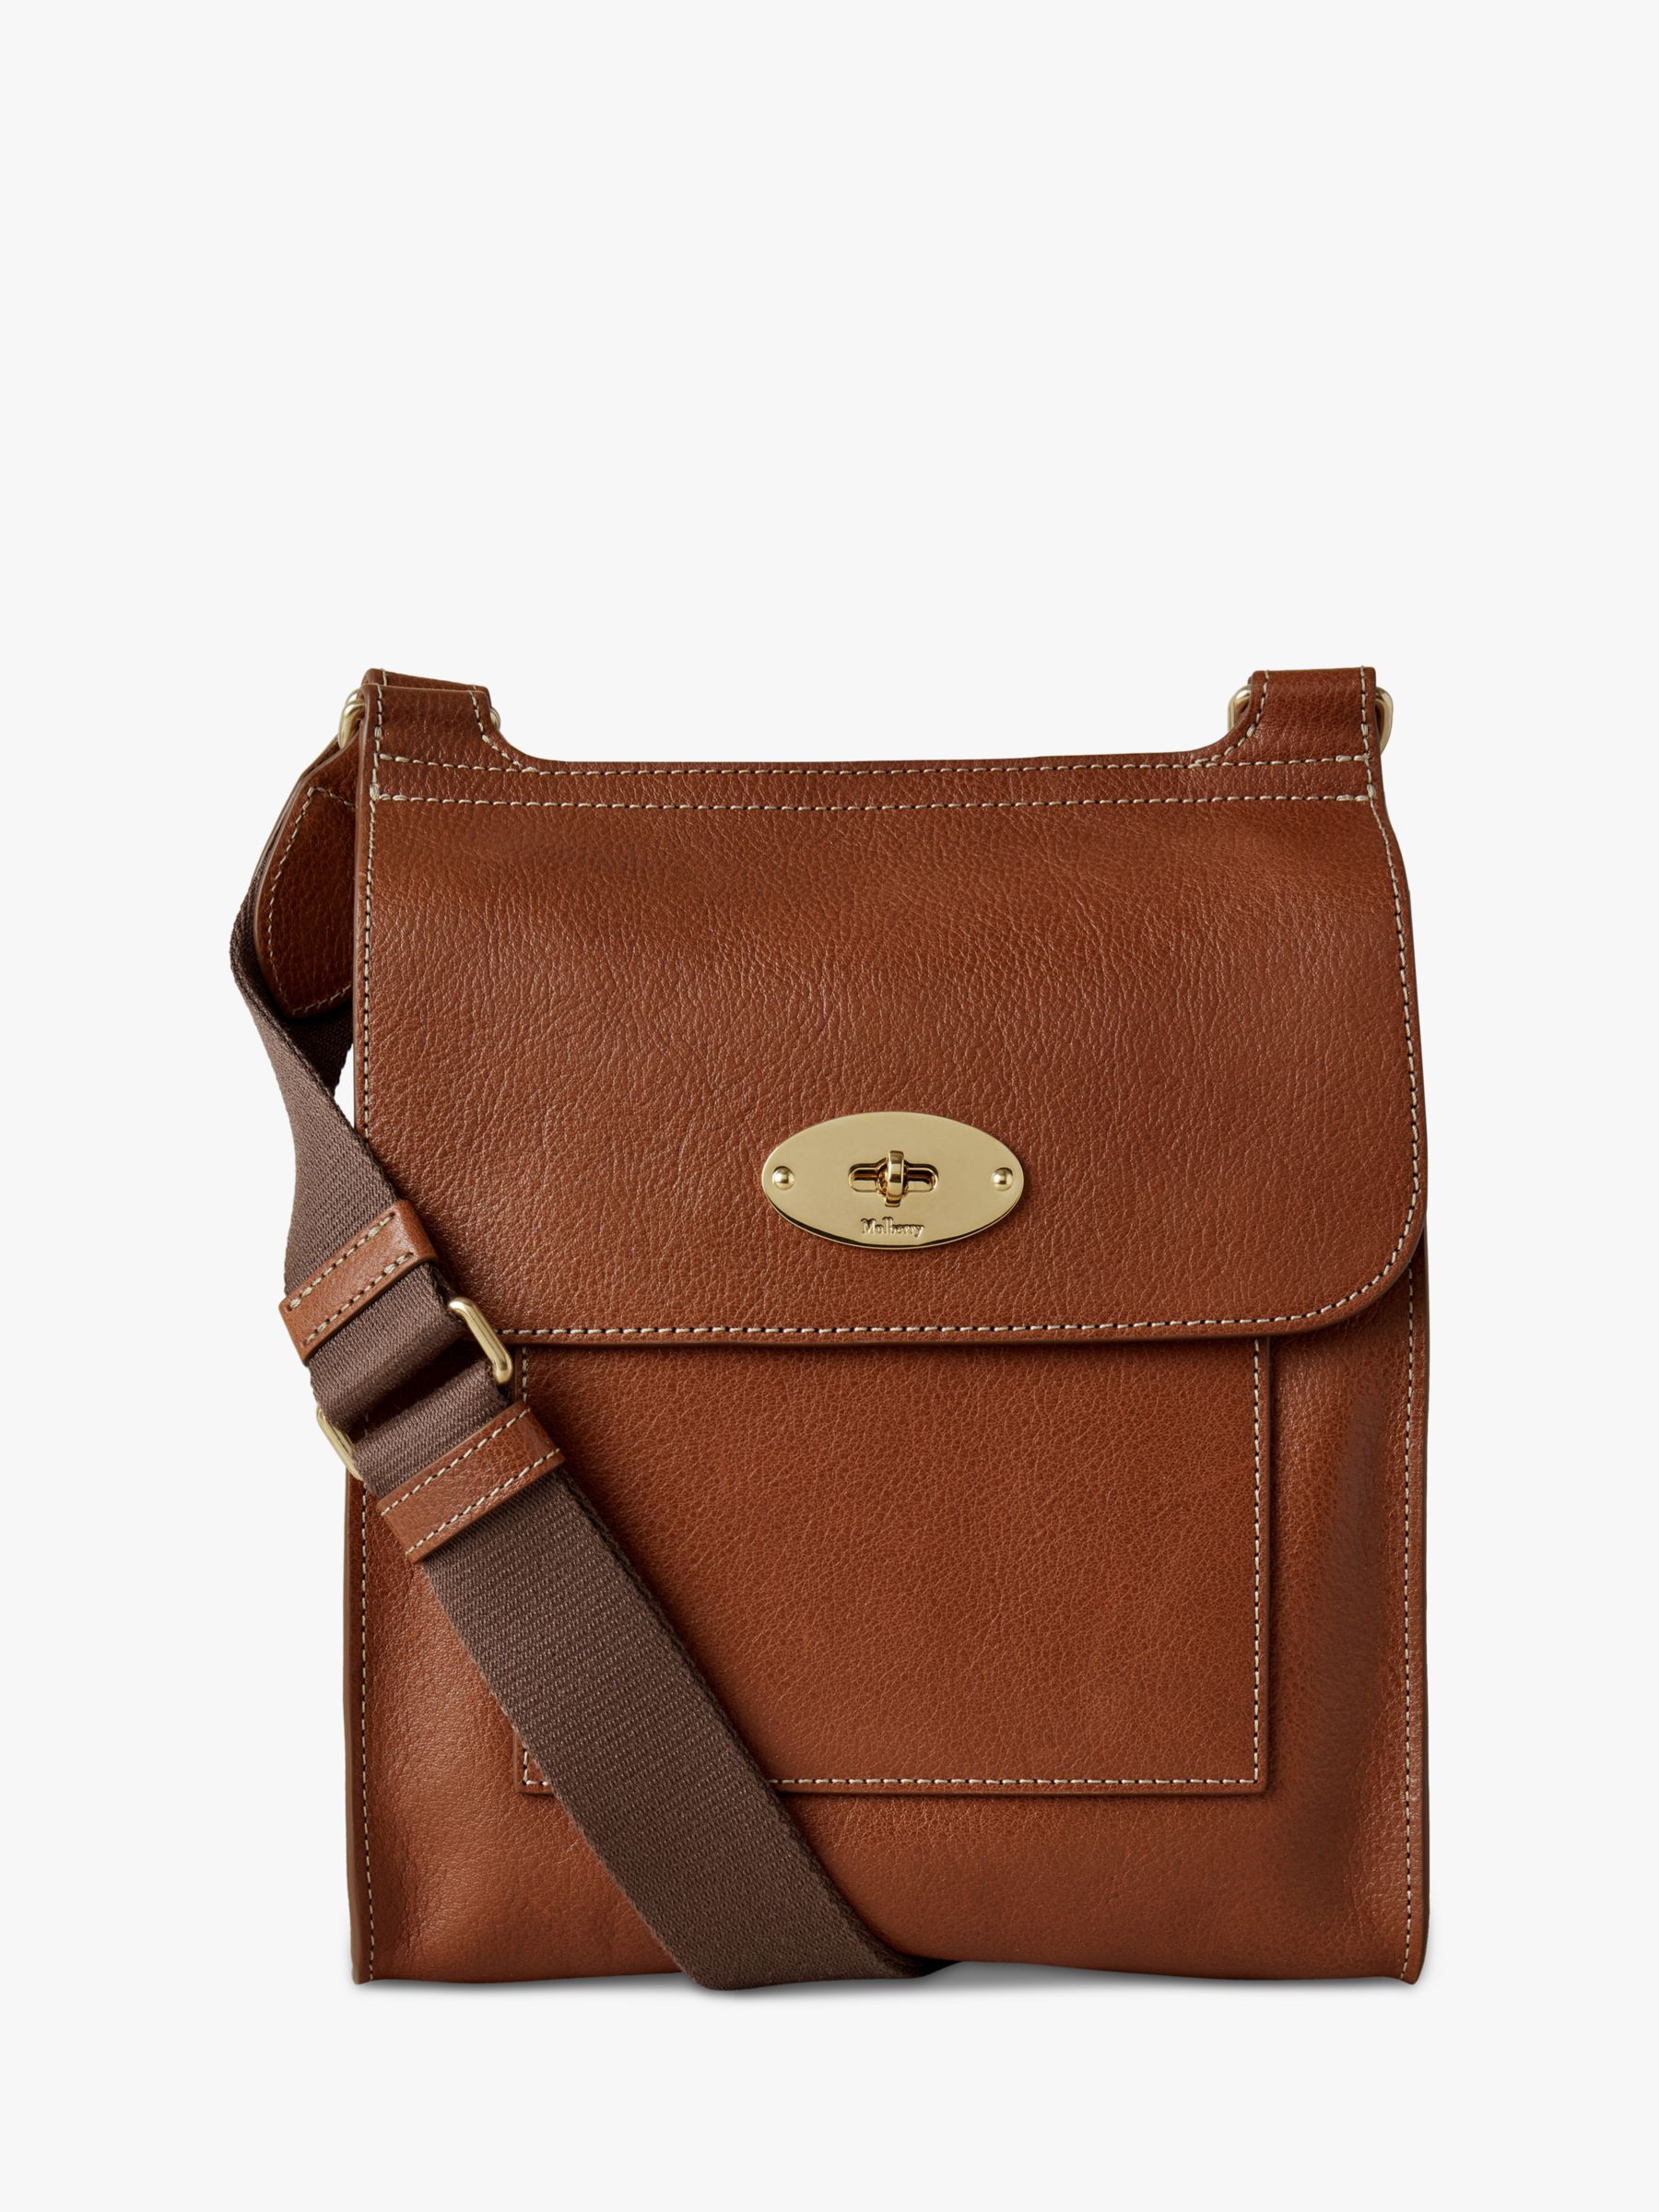 Mulberry Antony Leather Cross-body Bag in Brown